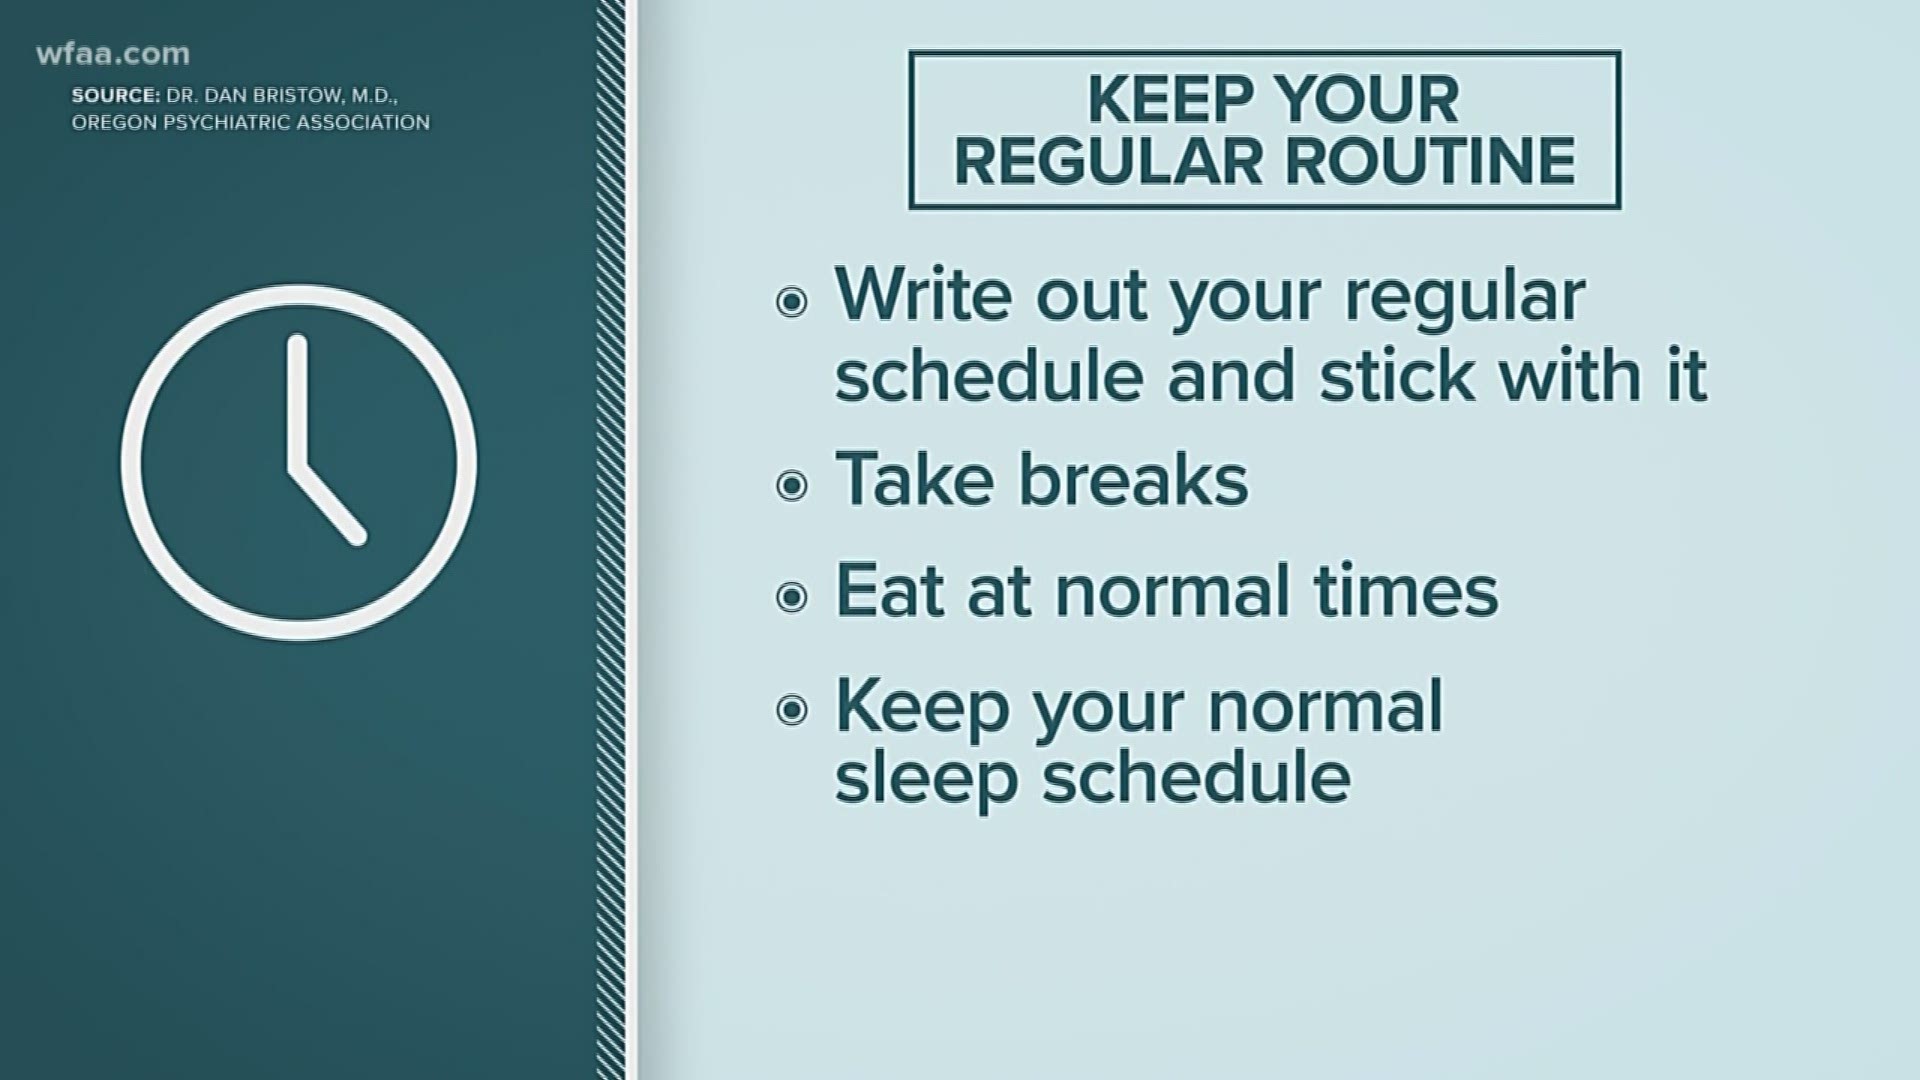 Texans are limited on things they can do during the coronavirus outbreak. Sonia Azad has helpful tips on how to take care of your mental health this weekend.